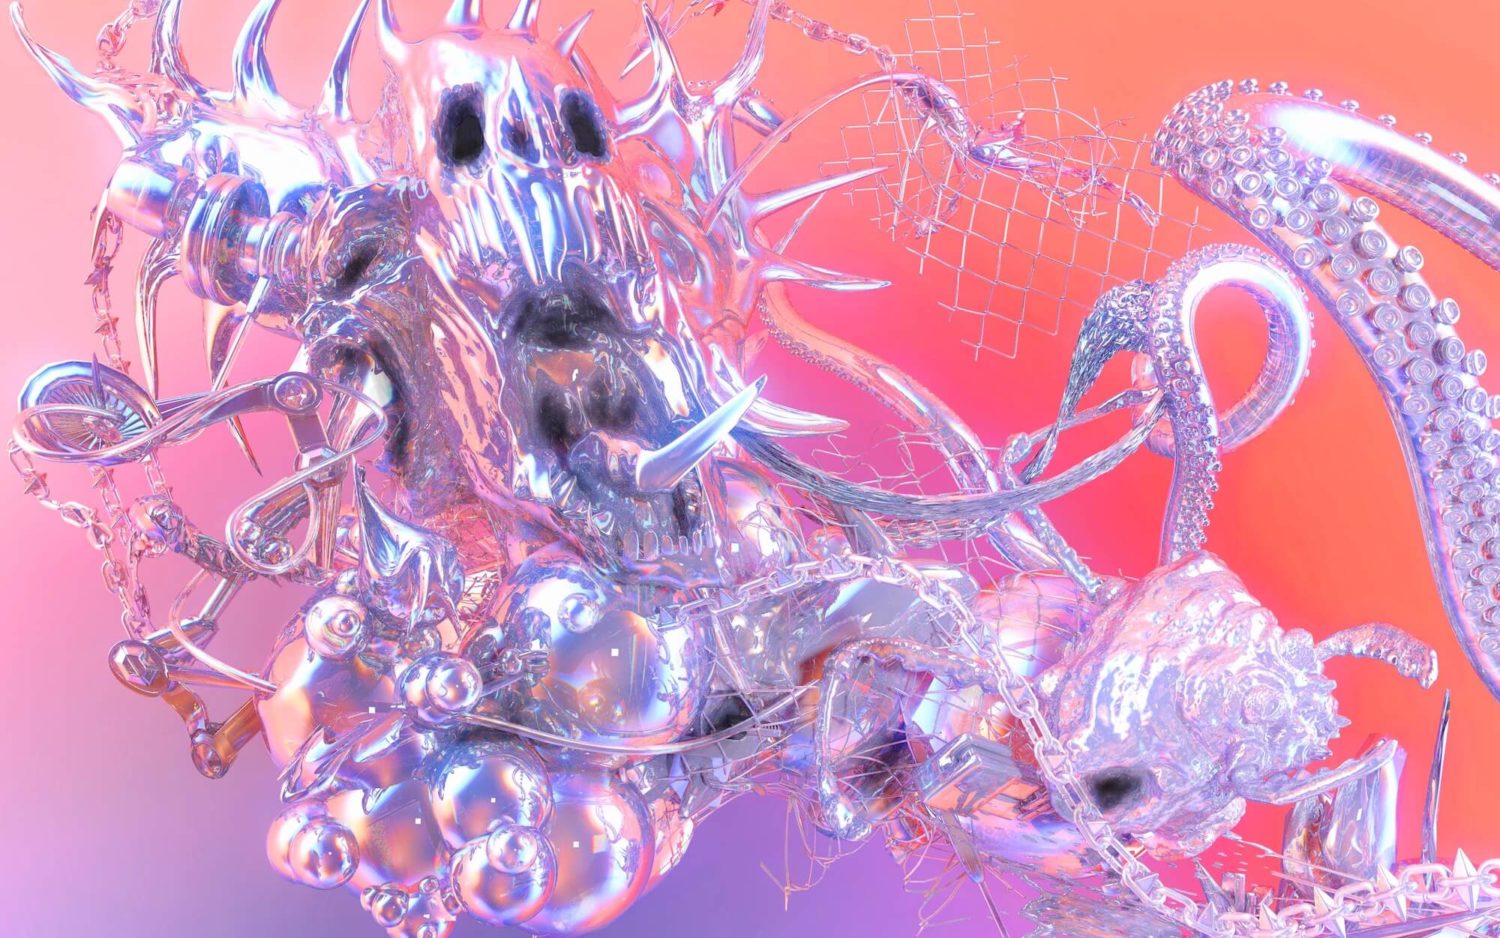 Digital Excreta, Chaotic yet sterile (Null) (2019), arebyte gallery, the digital weird